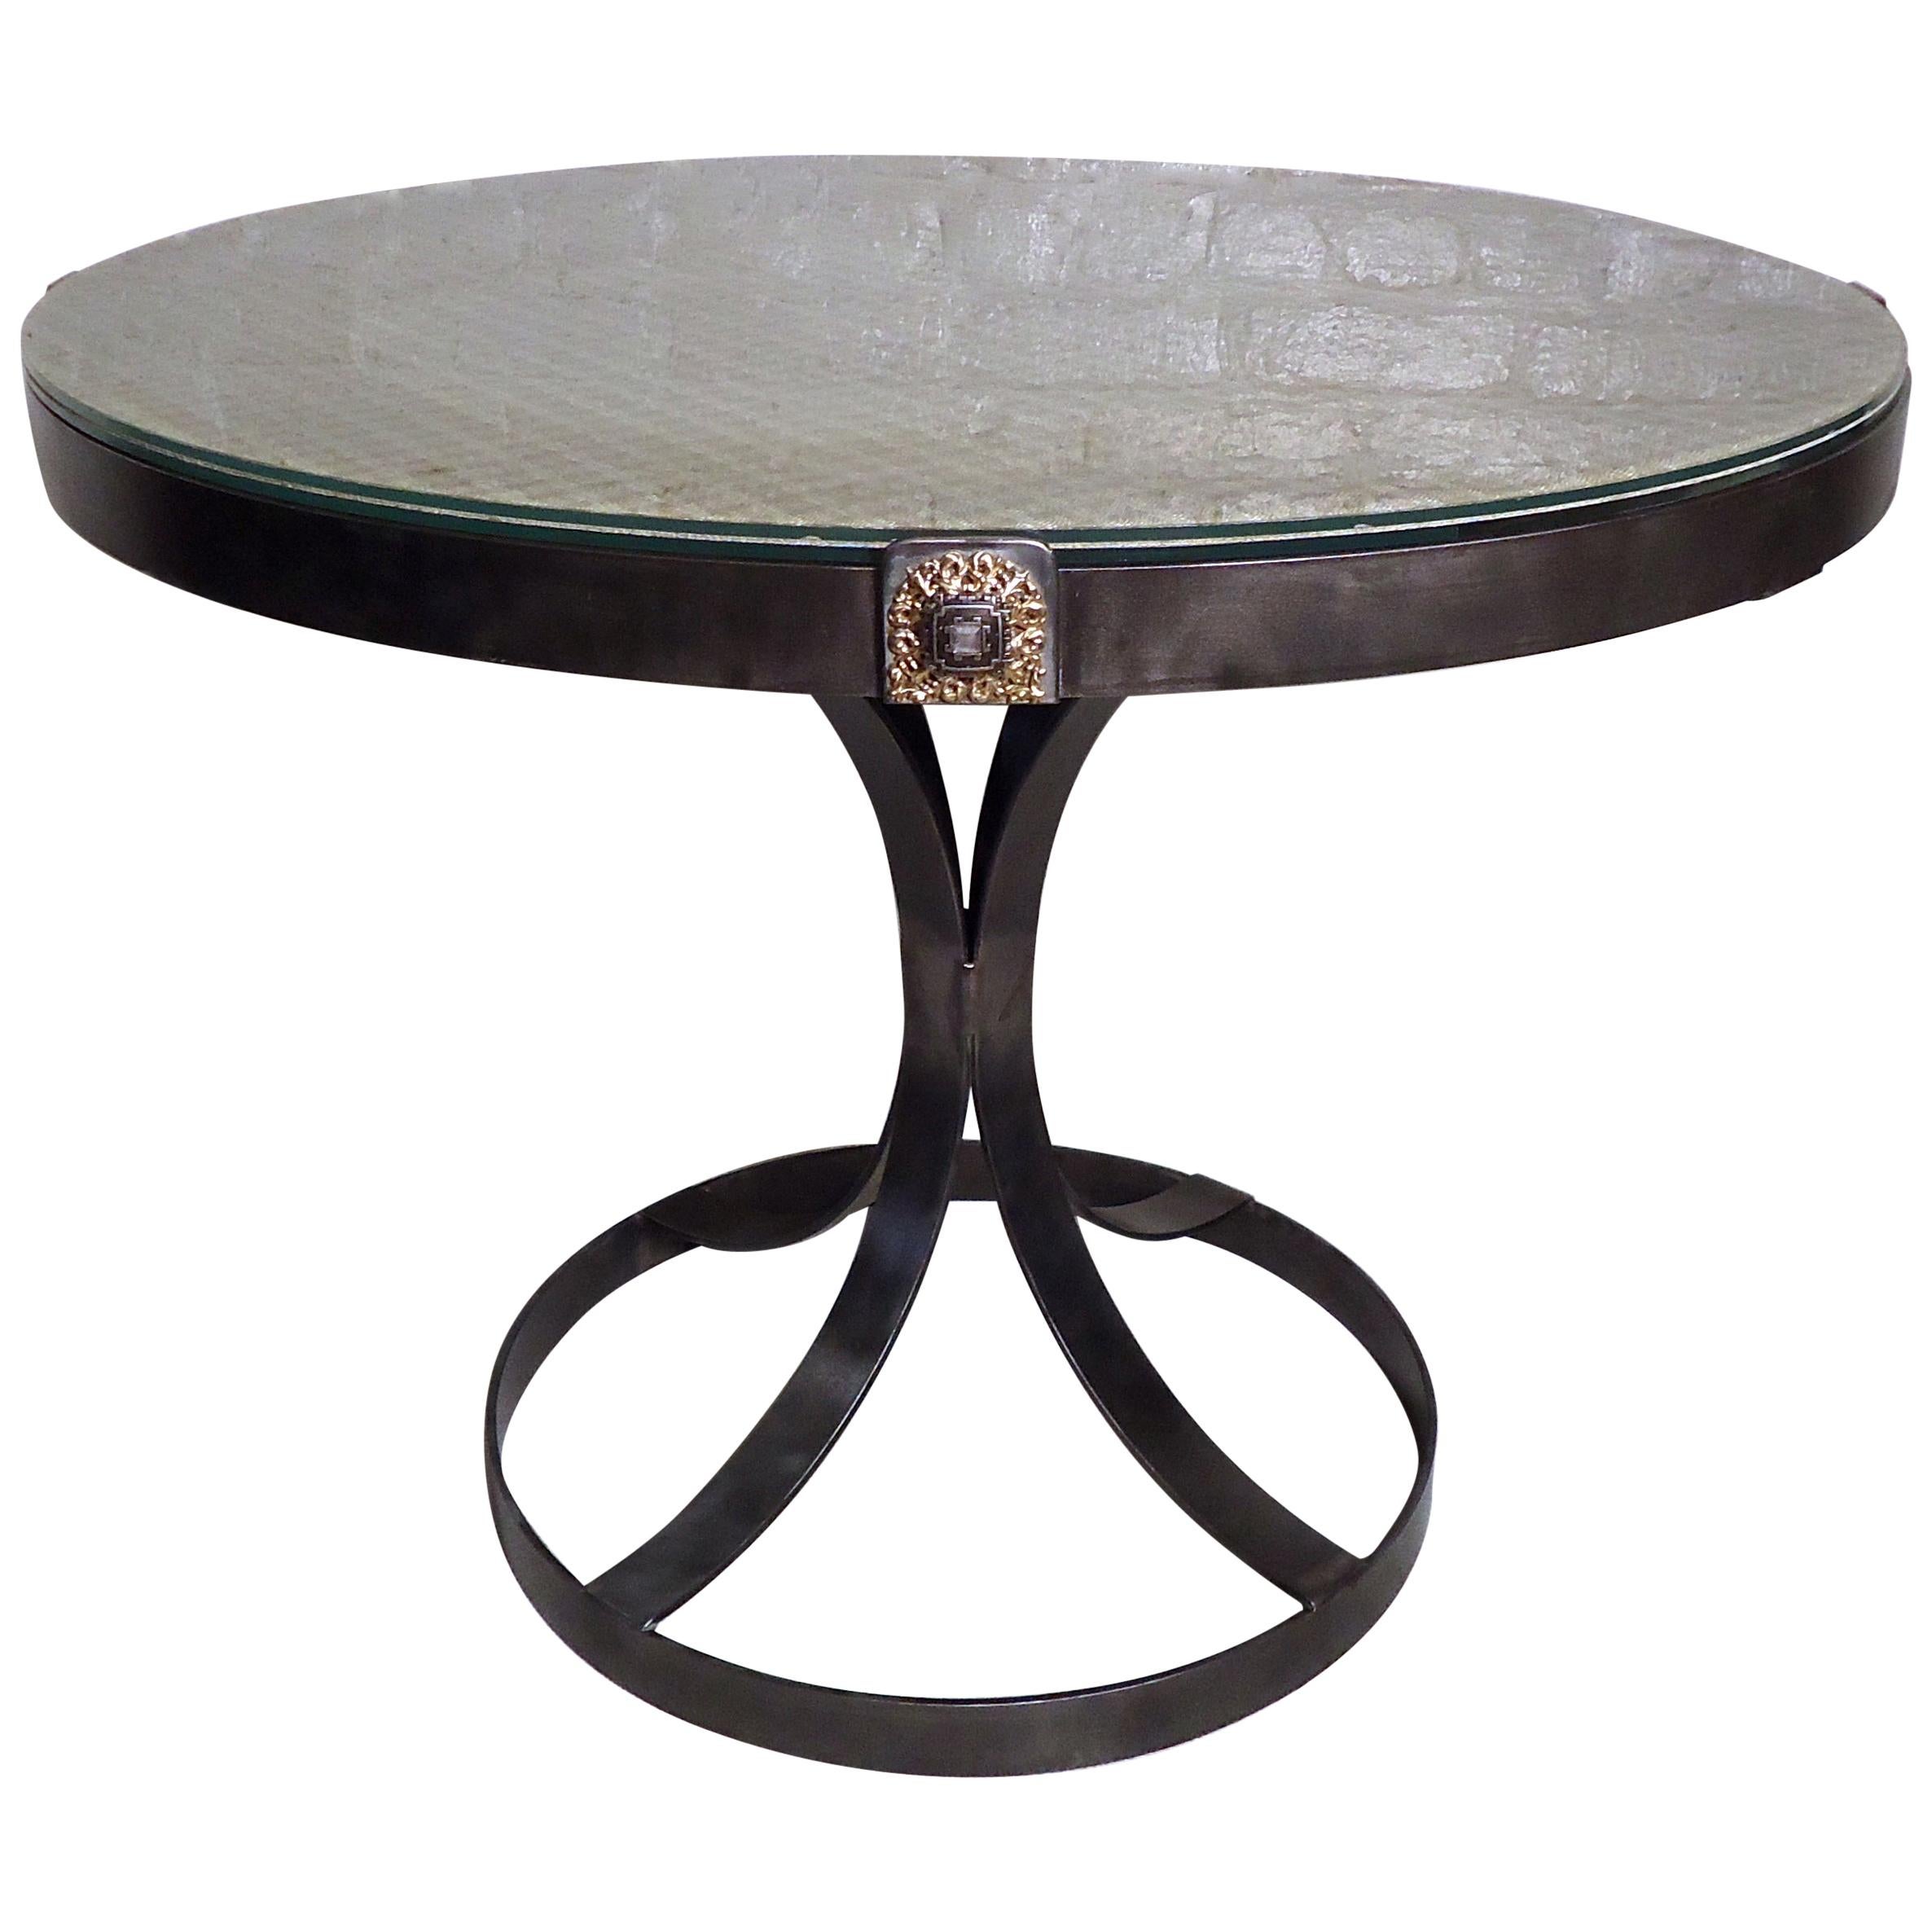 Vintage Industrial Glass Top Table